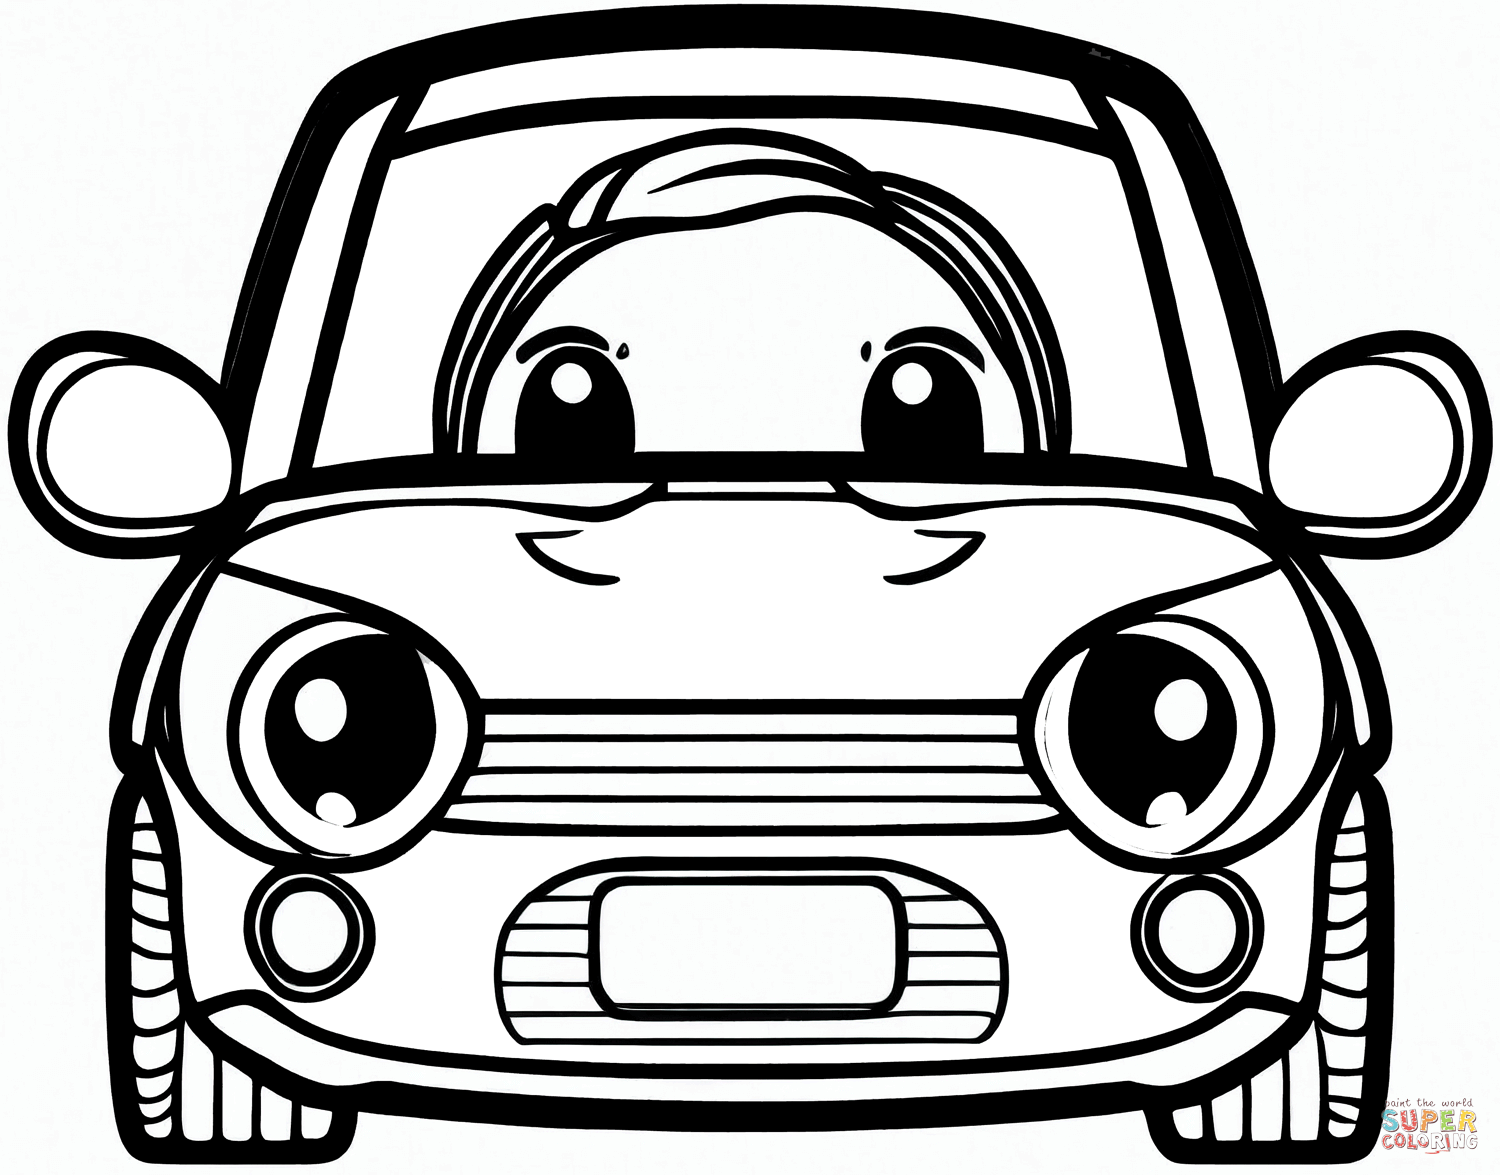 Mini car coloring page free printable coloring pages